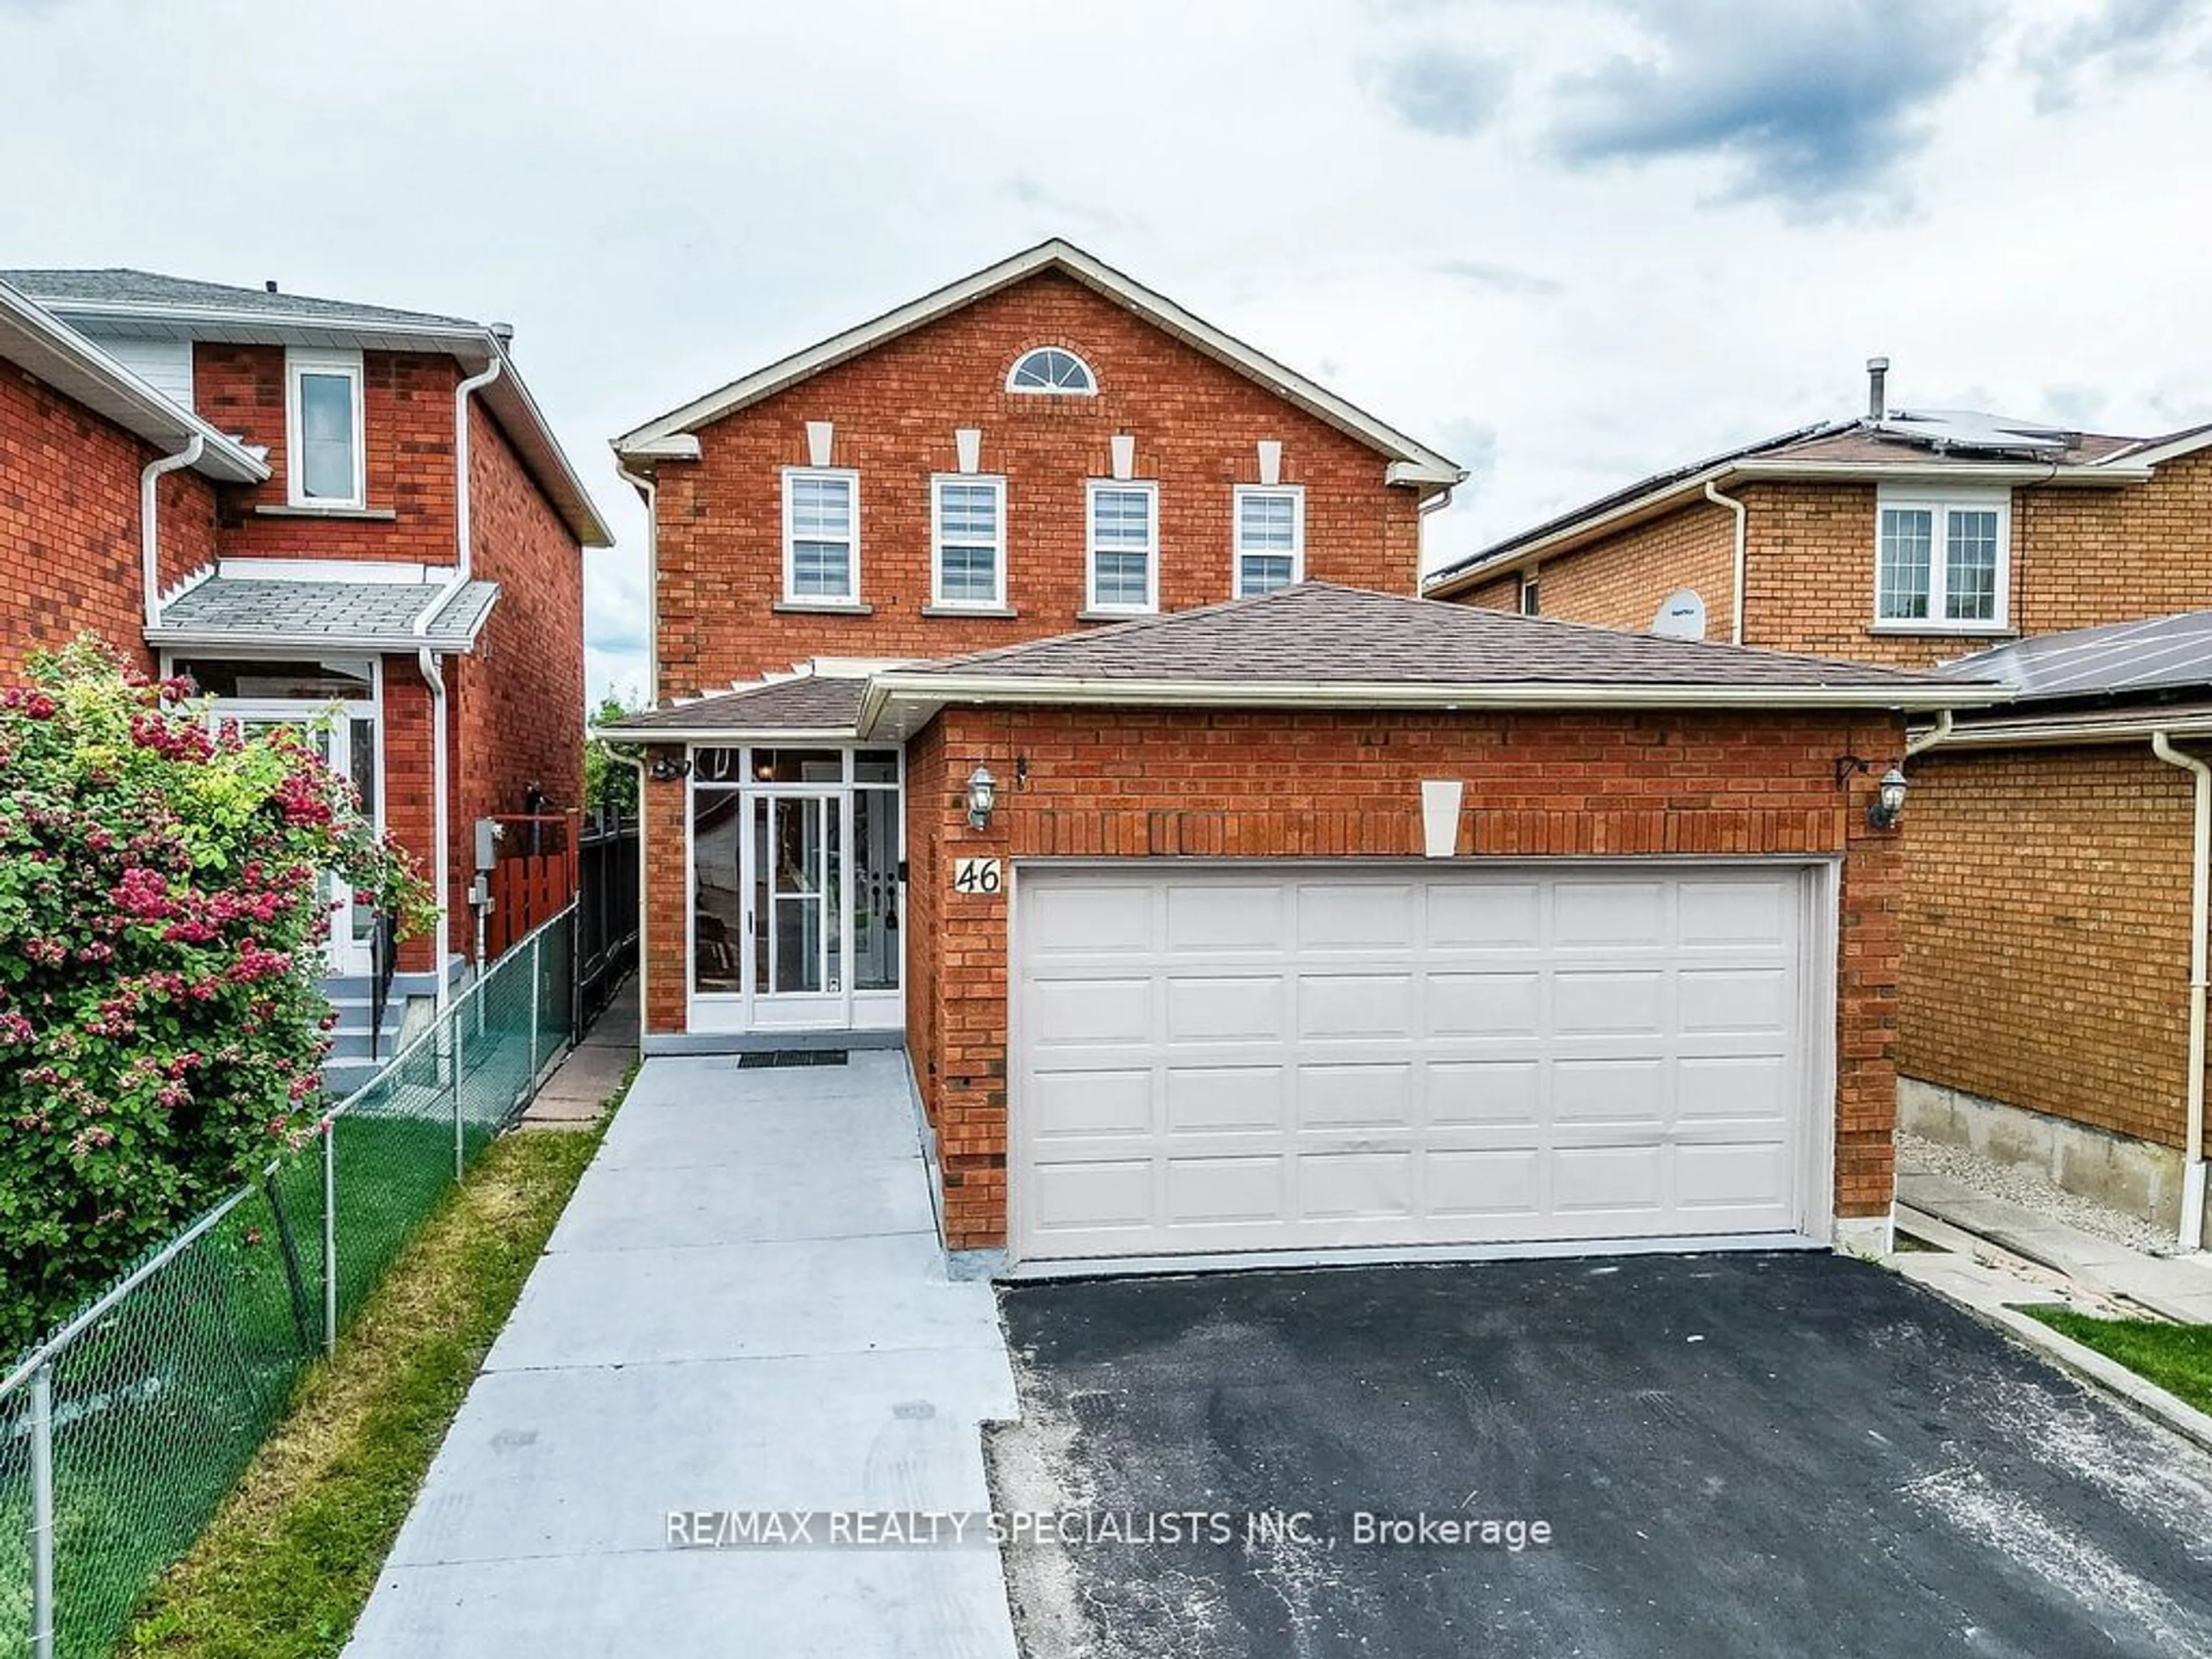 Home with brick exterior material for 46 Kingknoll Dr, Brampton Ontario L6Y 3G6